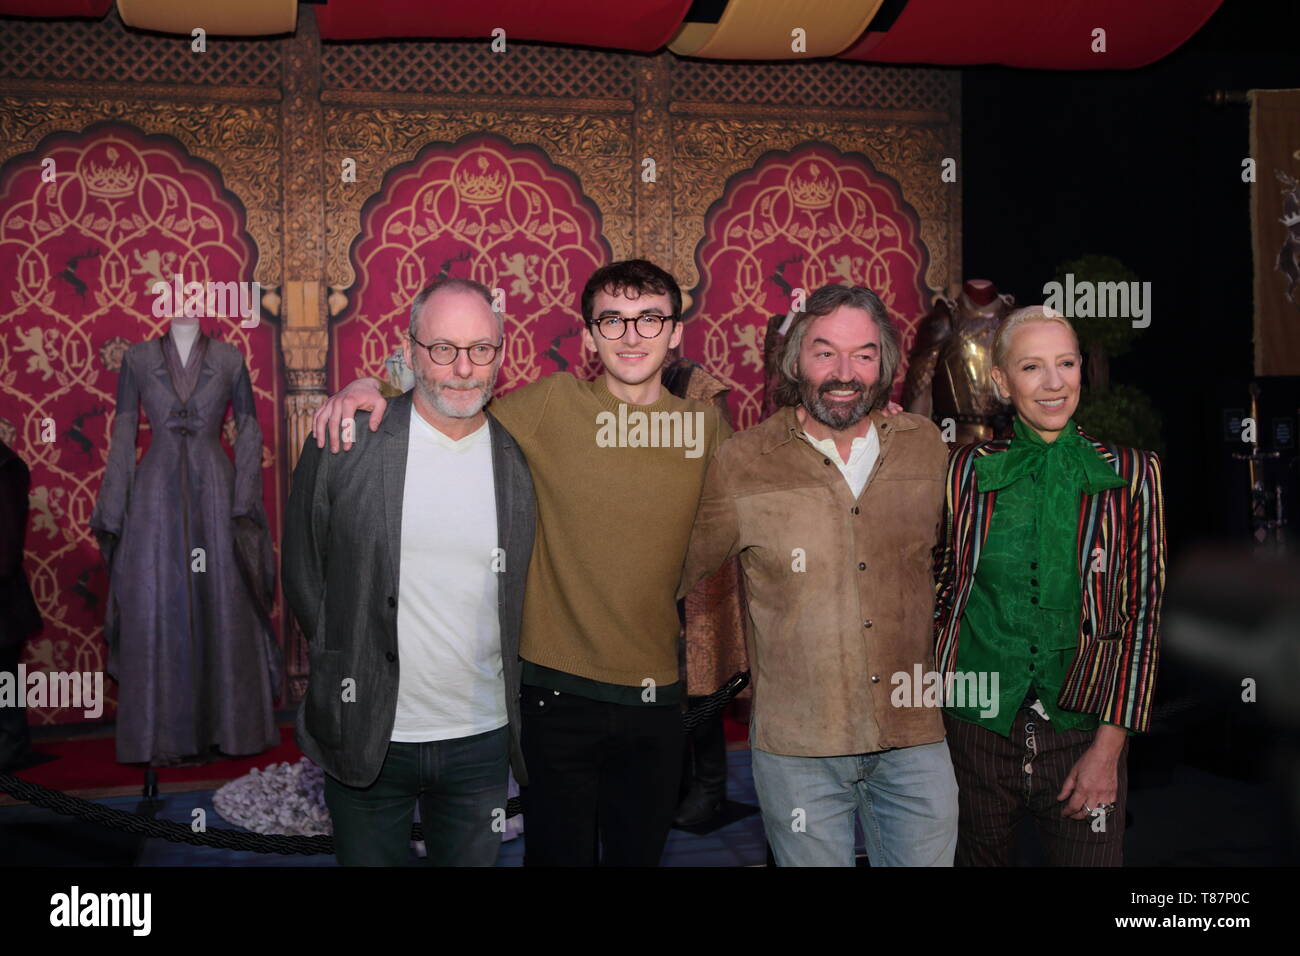 'Game of Thrones’ stars open the GAME OF THRONES: The Touring Exhibition at TEC Belfast   Featuring: Isaac Hempstead Wright, Ian Beattie, Liam Cunningham, Michele Clapton Where: Belfast N Ireland, United Kingdom When: 10 Apr 2019 Credit: WENN.com Stock Photo